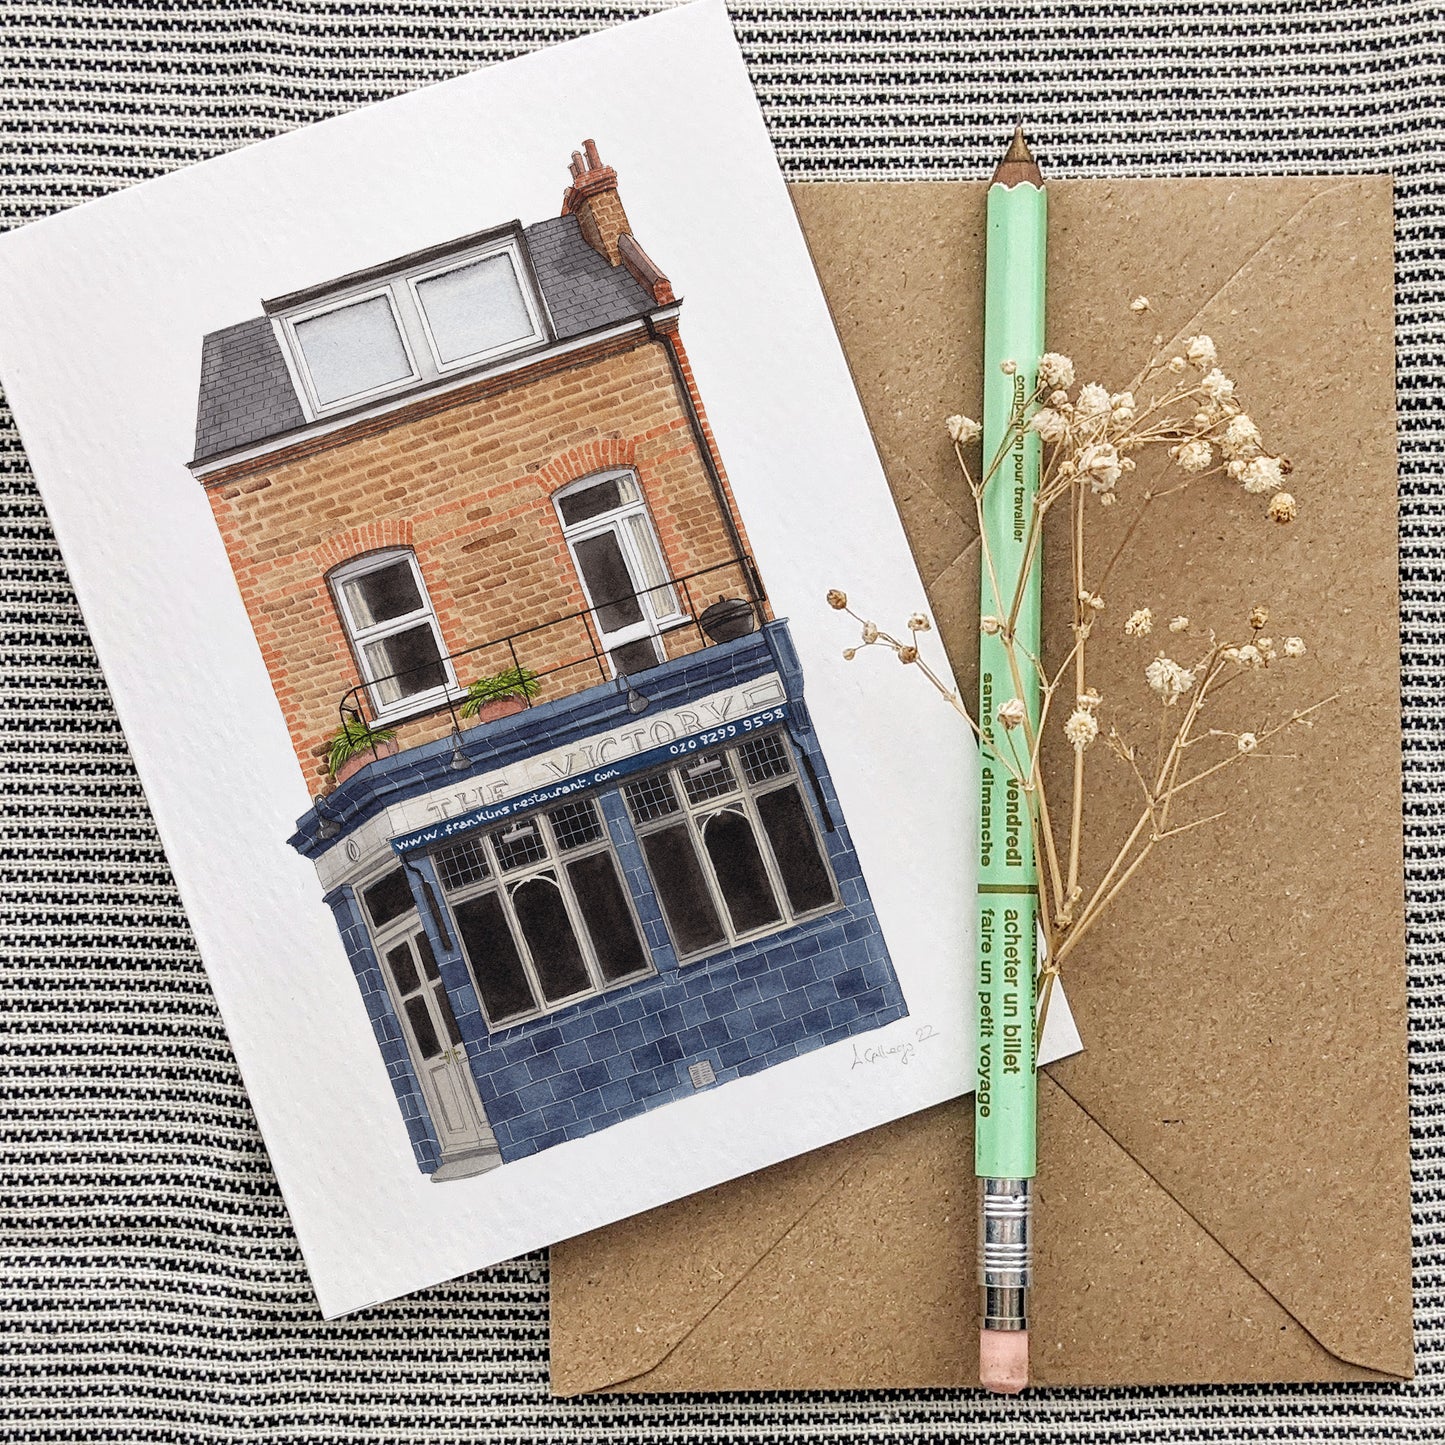 East Dulwich - Franklins Restaurant - Greeting card with envelope